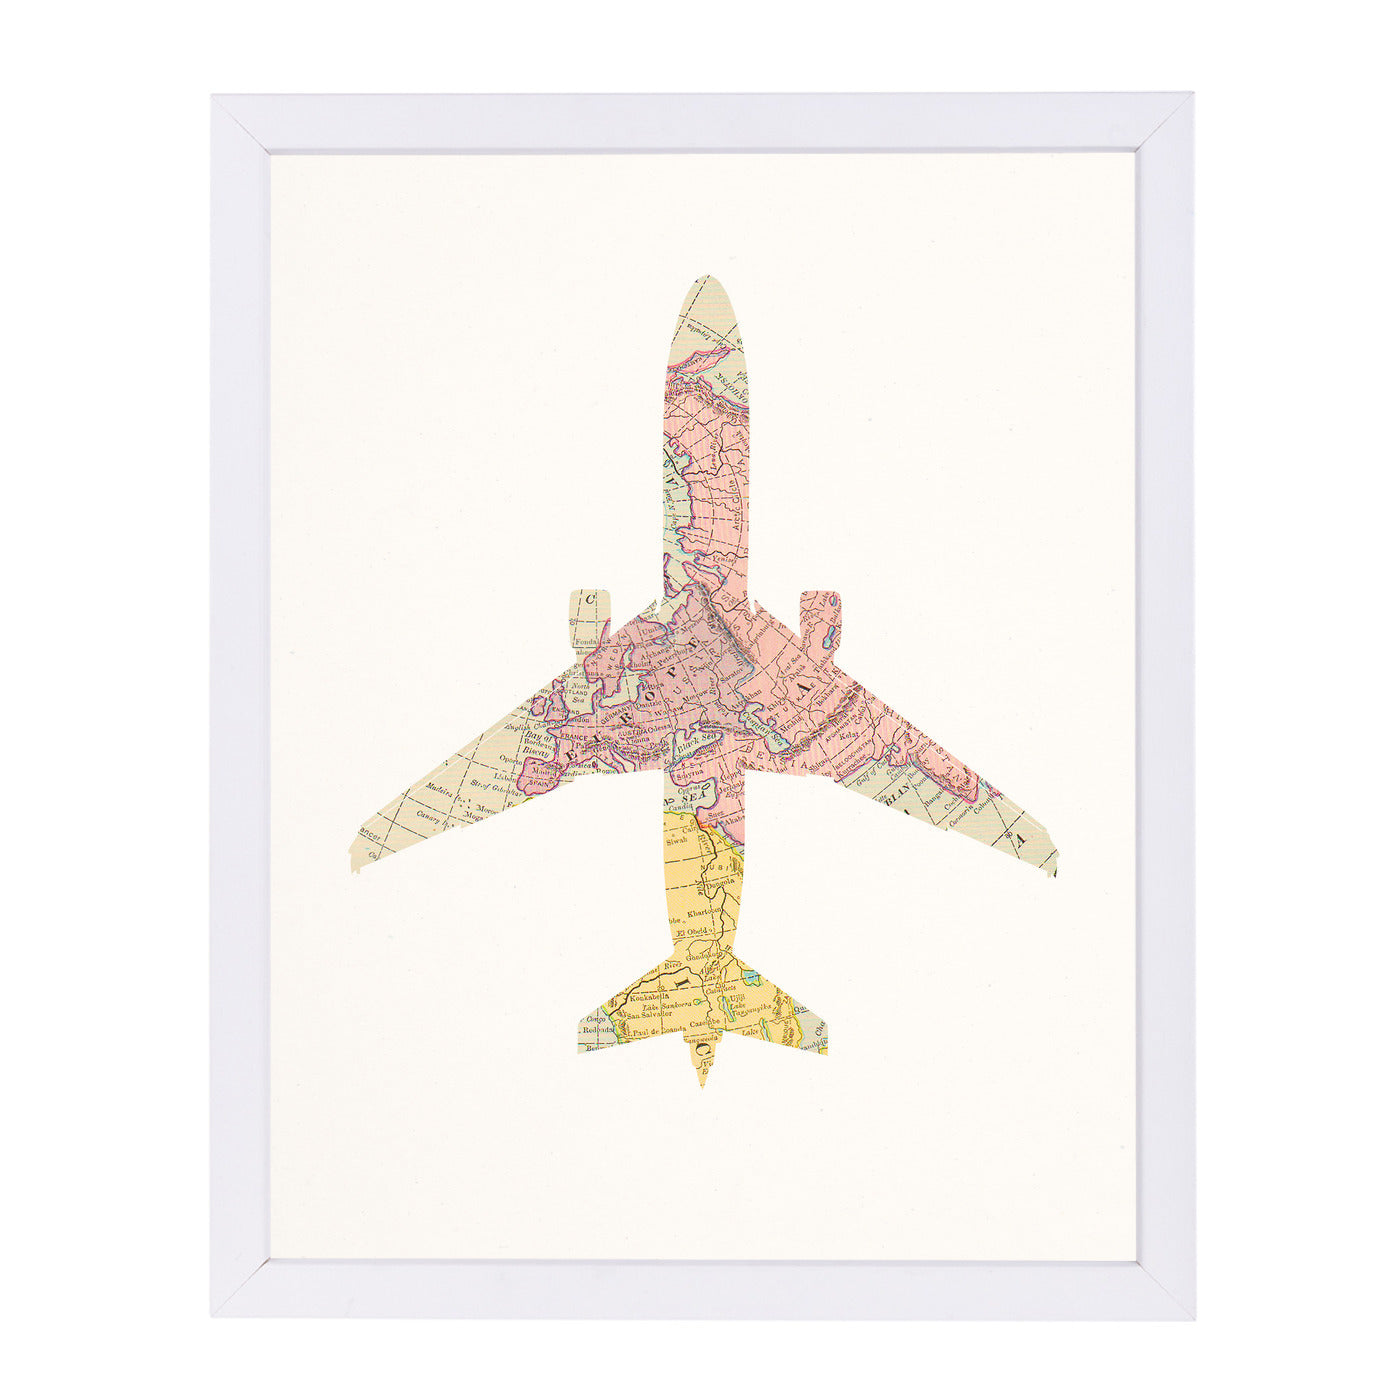 Vintage Map Plane Collage I By Chaos & Wonder Design - White Framed Print - Wall Art - Americanflat